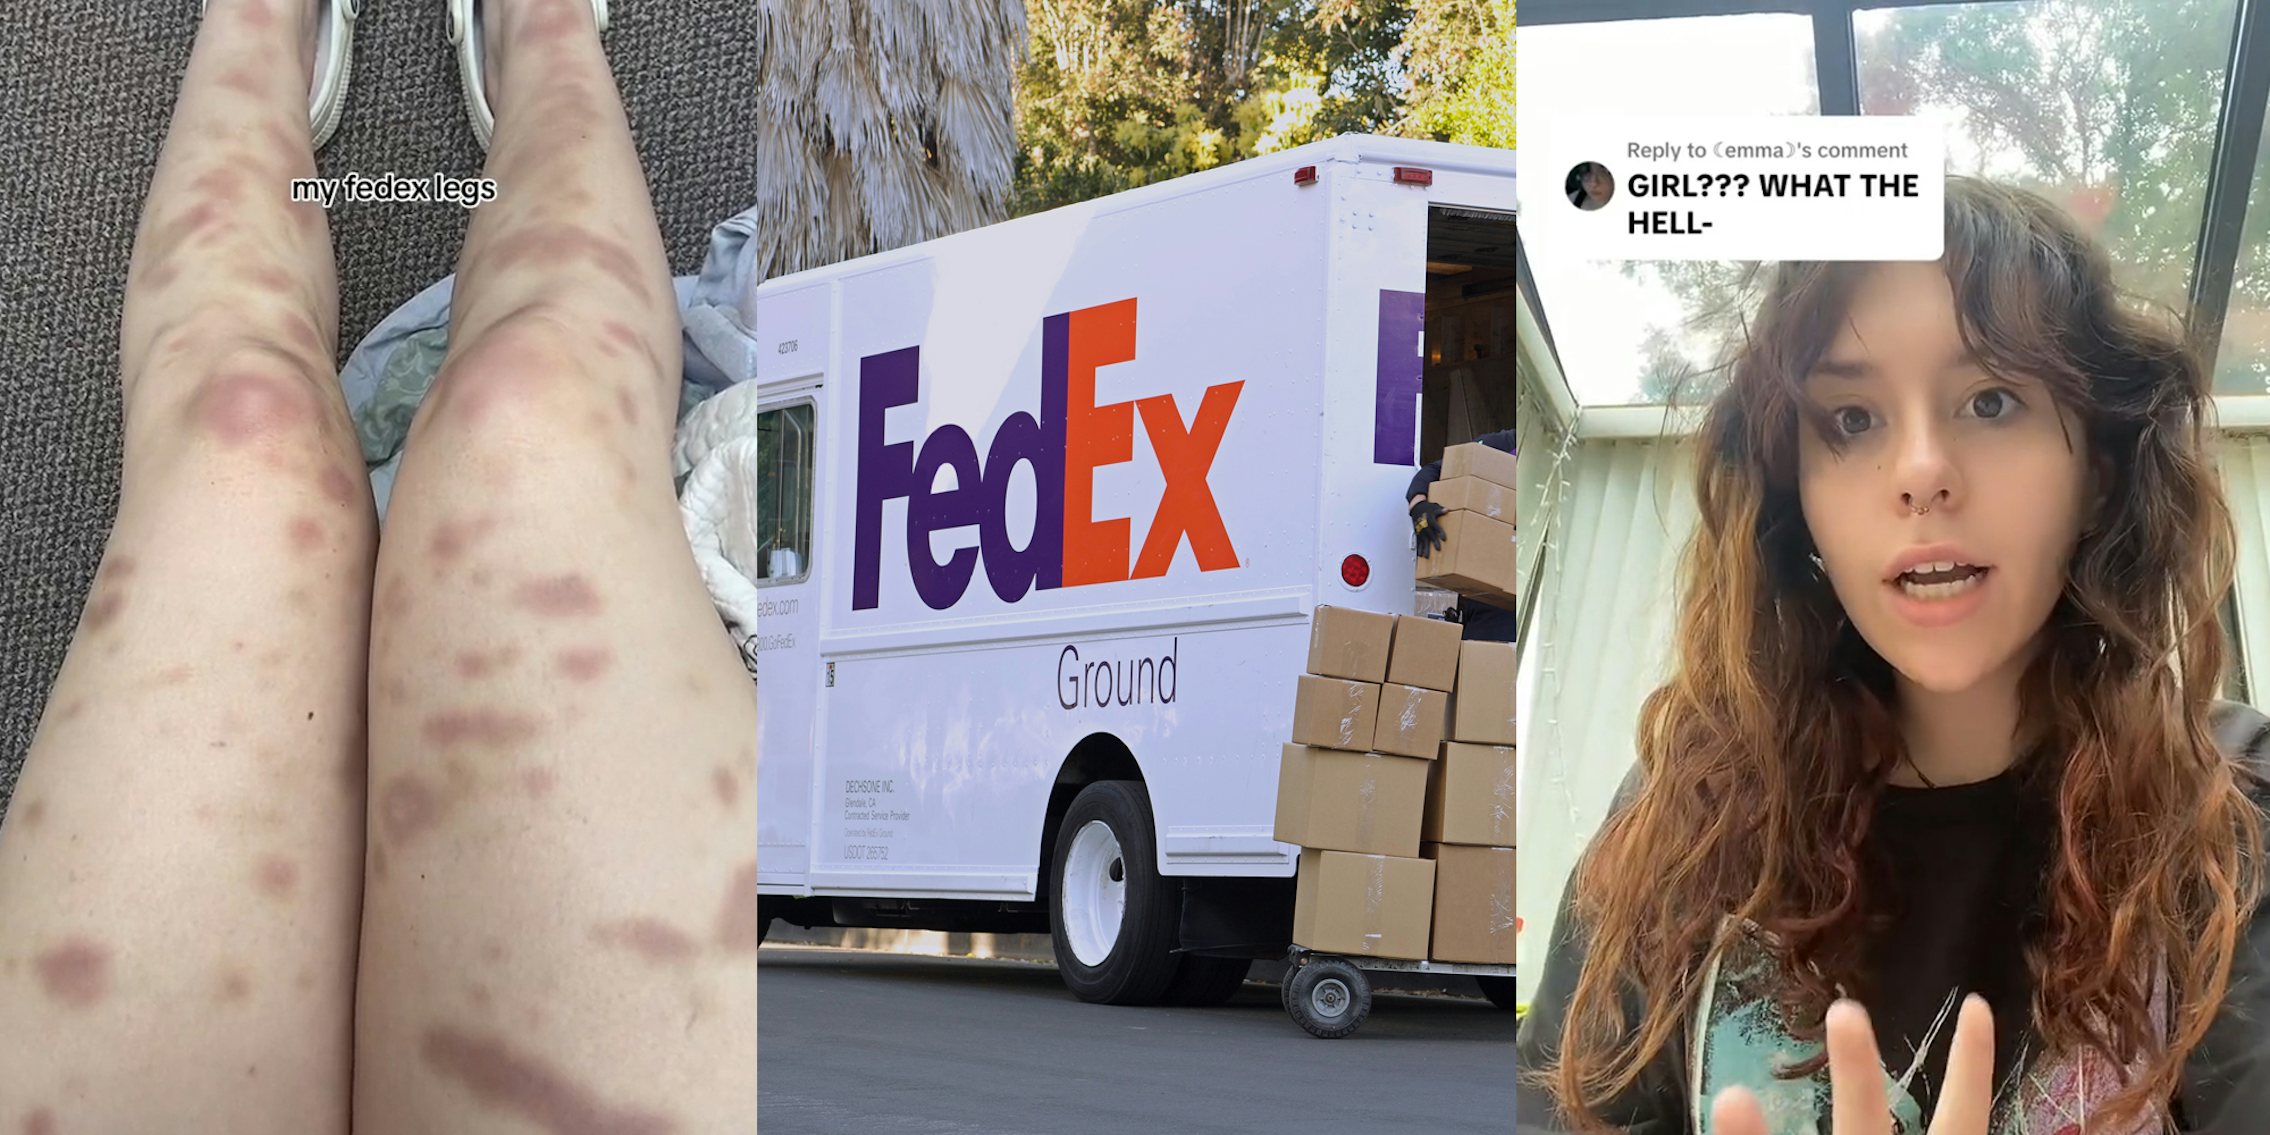 FedEx driver's legs covered in bruises with caption 'my fedex legs' (l) FedEx worker onloading boxes from FedEx truck (c) FedEx driver speaking with caption 'GIRL??? WHAT THE HELL-' (r)